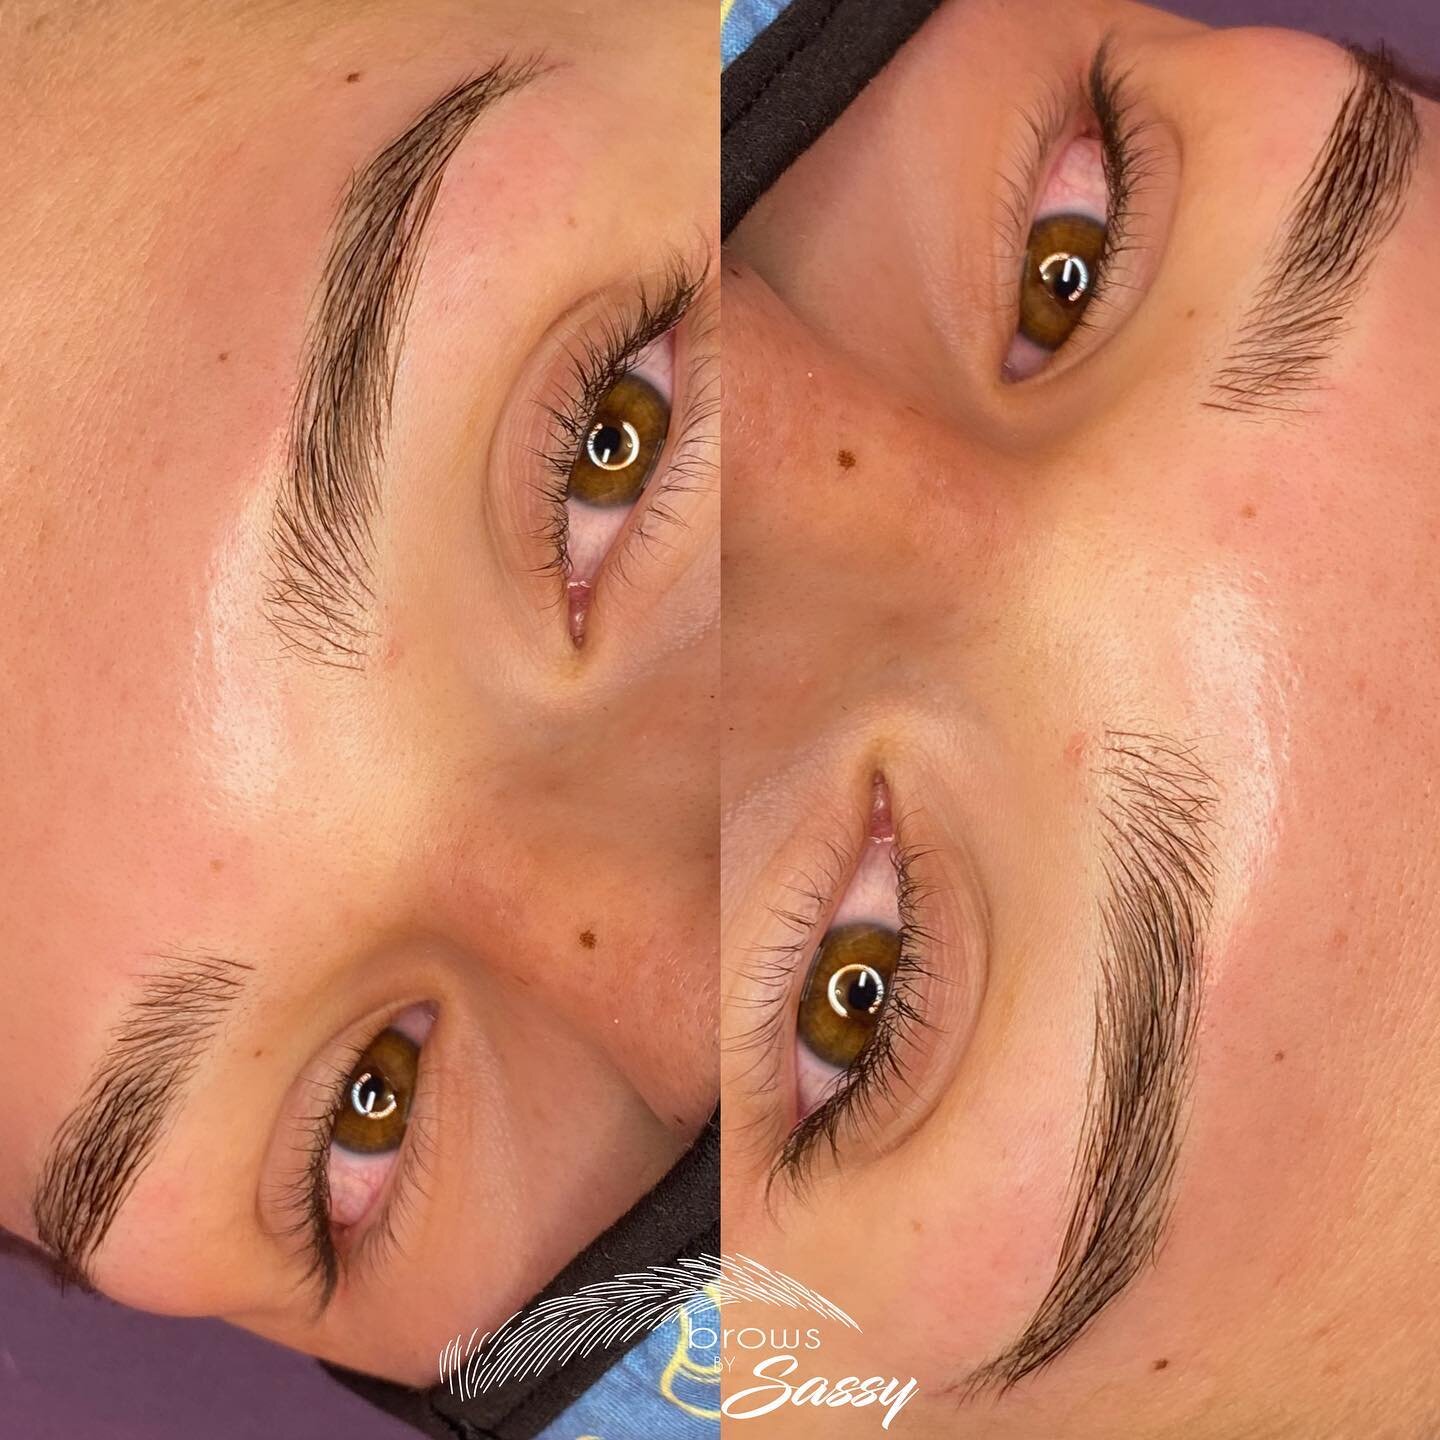 Microblading  waterproof and natural looking brows! 
The procedure involves tiny strokes that build a texture that looks like your own eyebrow hair. Microblading results can last 12-18 months depending on skin type and aftercare. 

#elpasomicrobladin